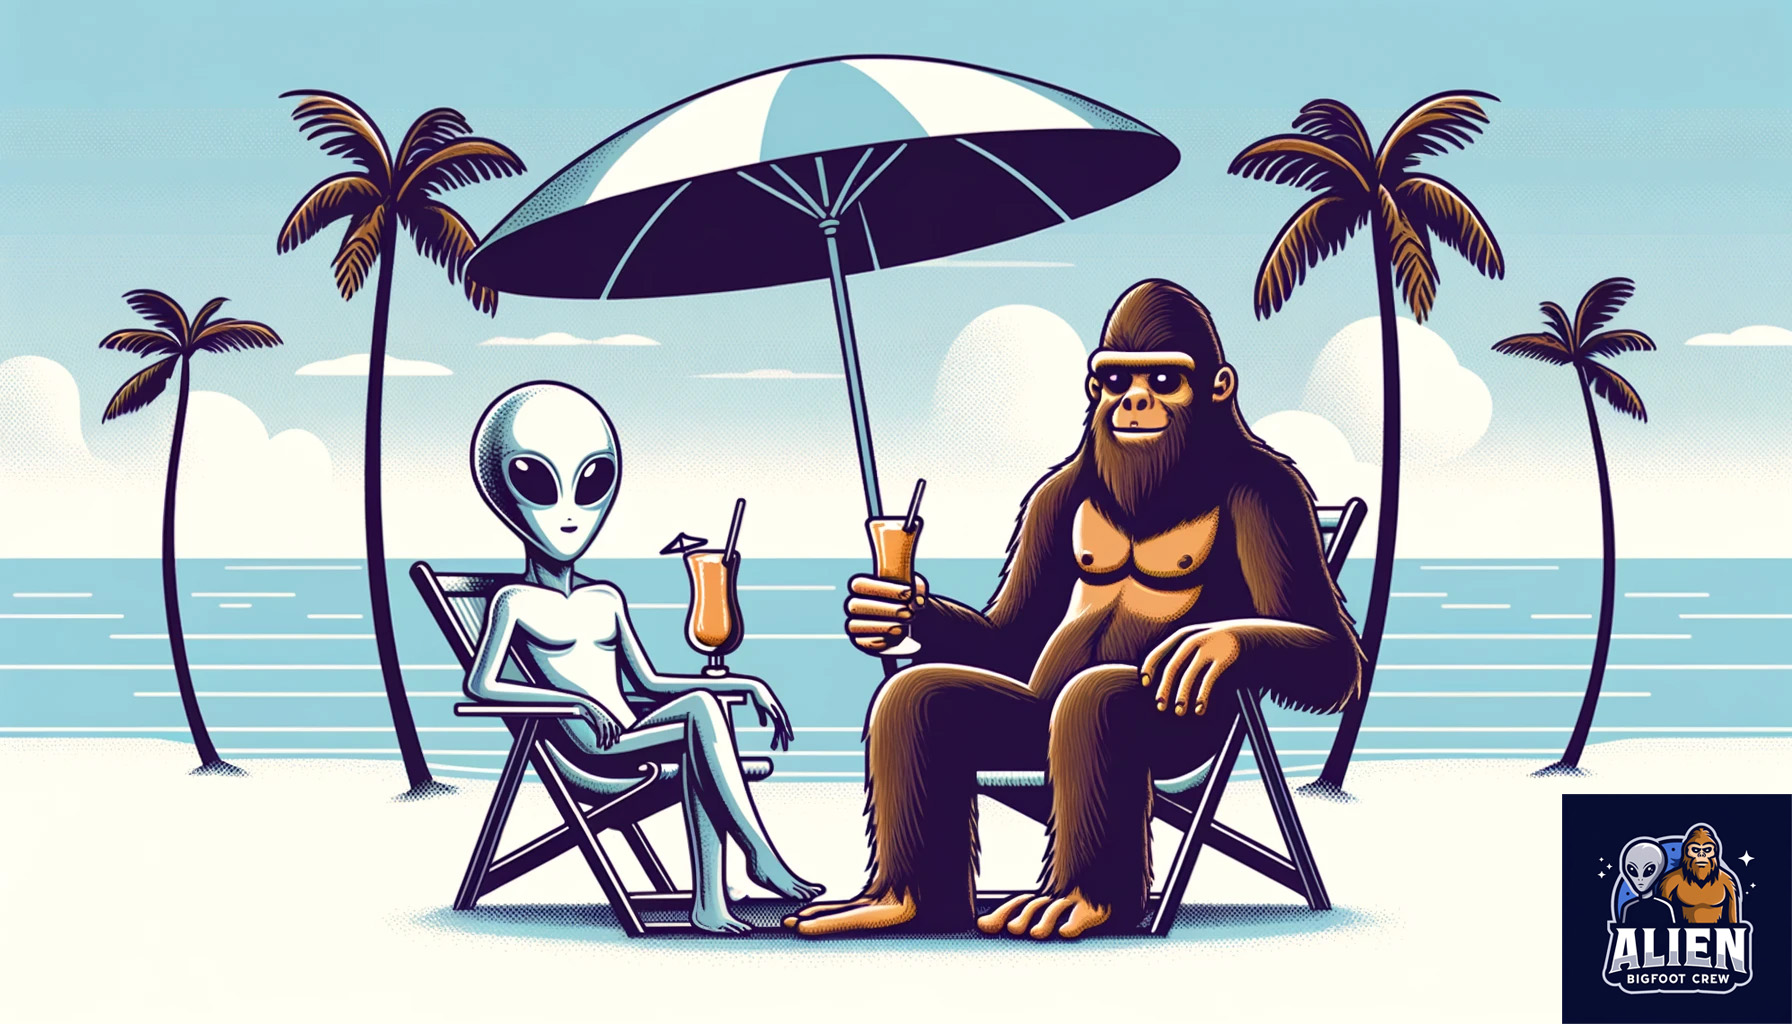 Alien and Bigfoot on a beach